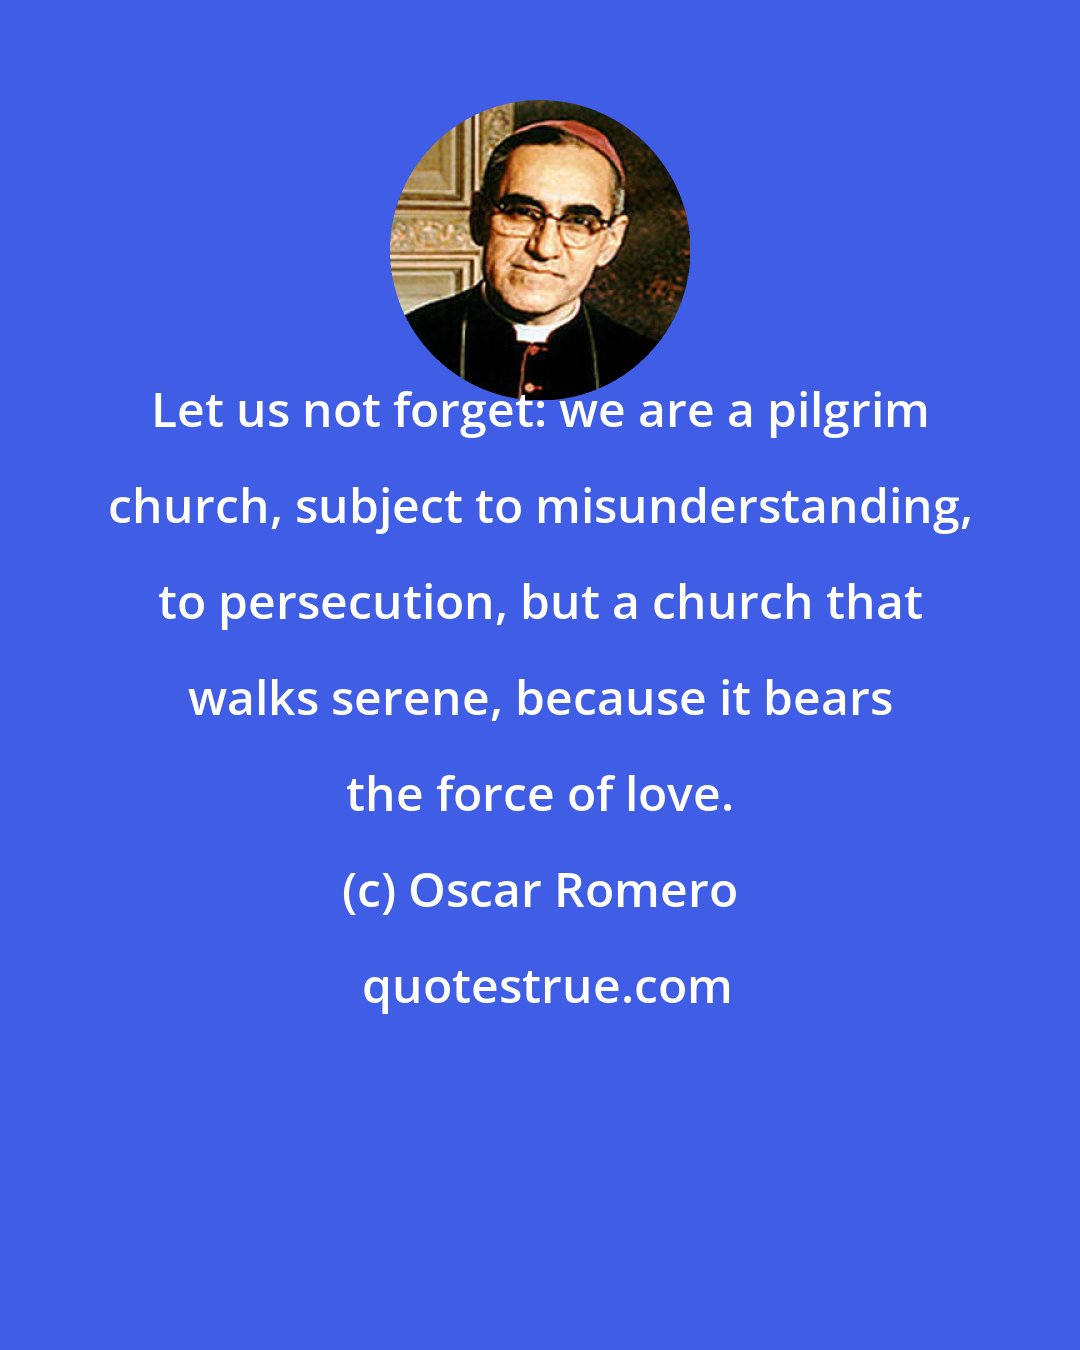 Oscar Romero: Let us not forget: we are a pilgrim church, subject to misunderstanding, to persecution, but a church that walks serene, because it bears the force of love.